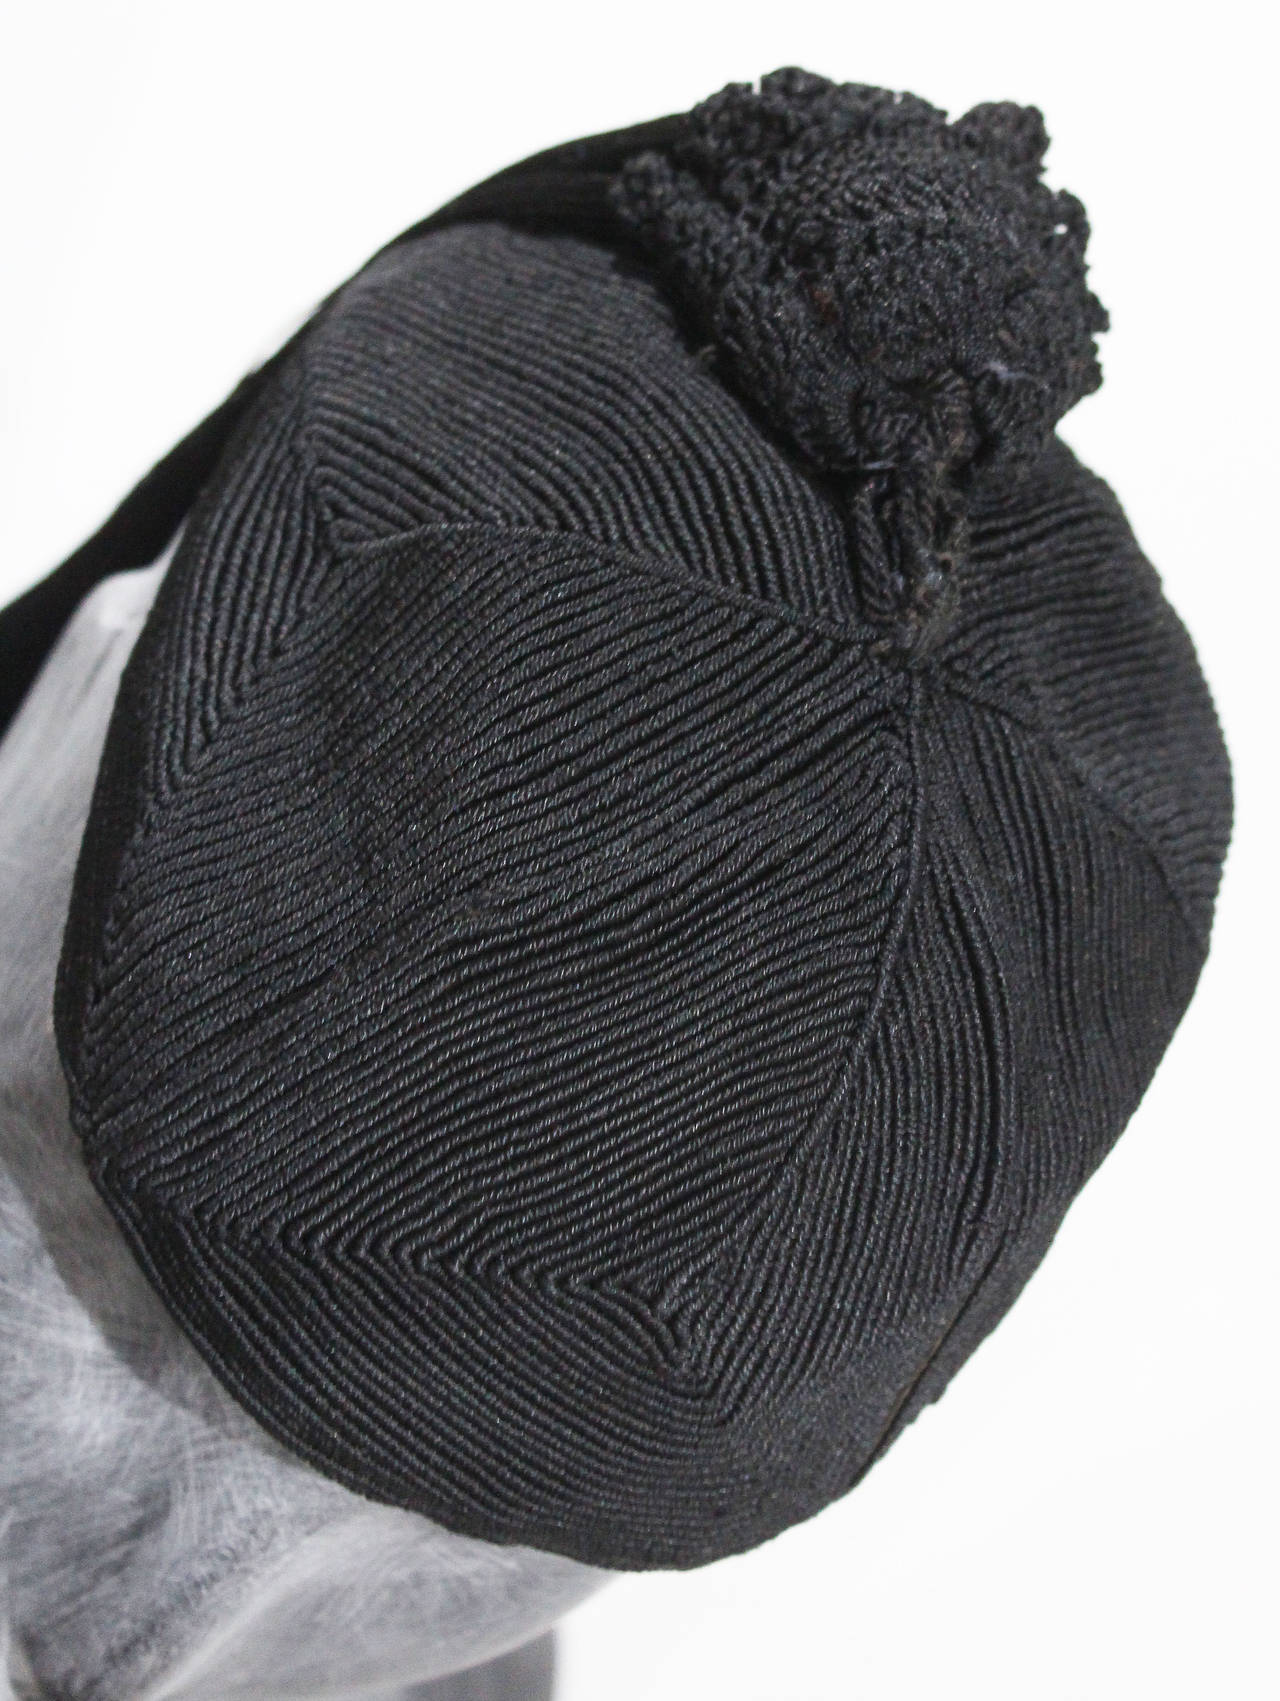 Gray Spectacular original 1920s embroidered skull cap with ponytail